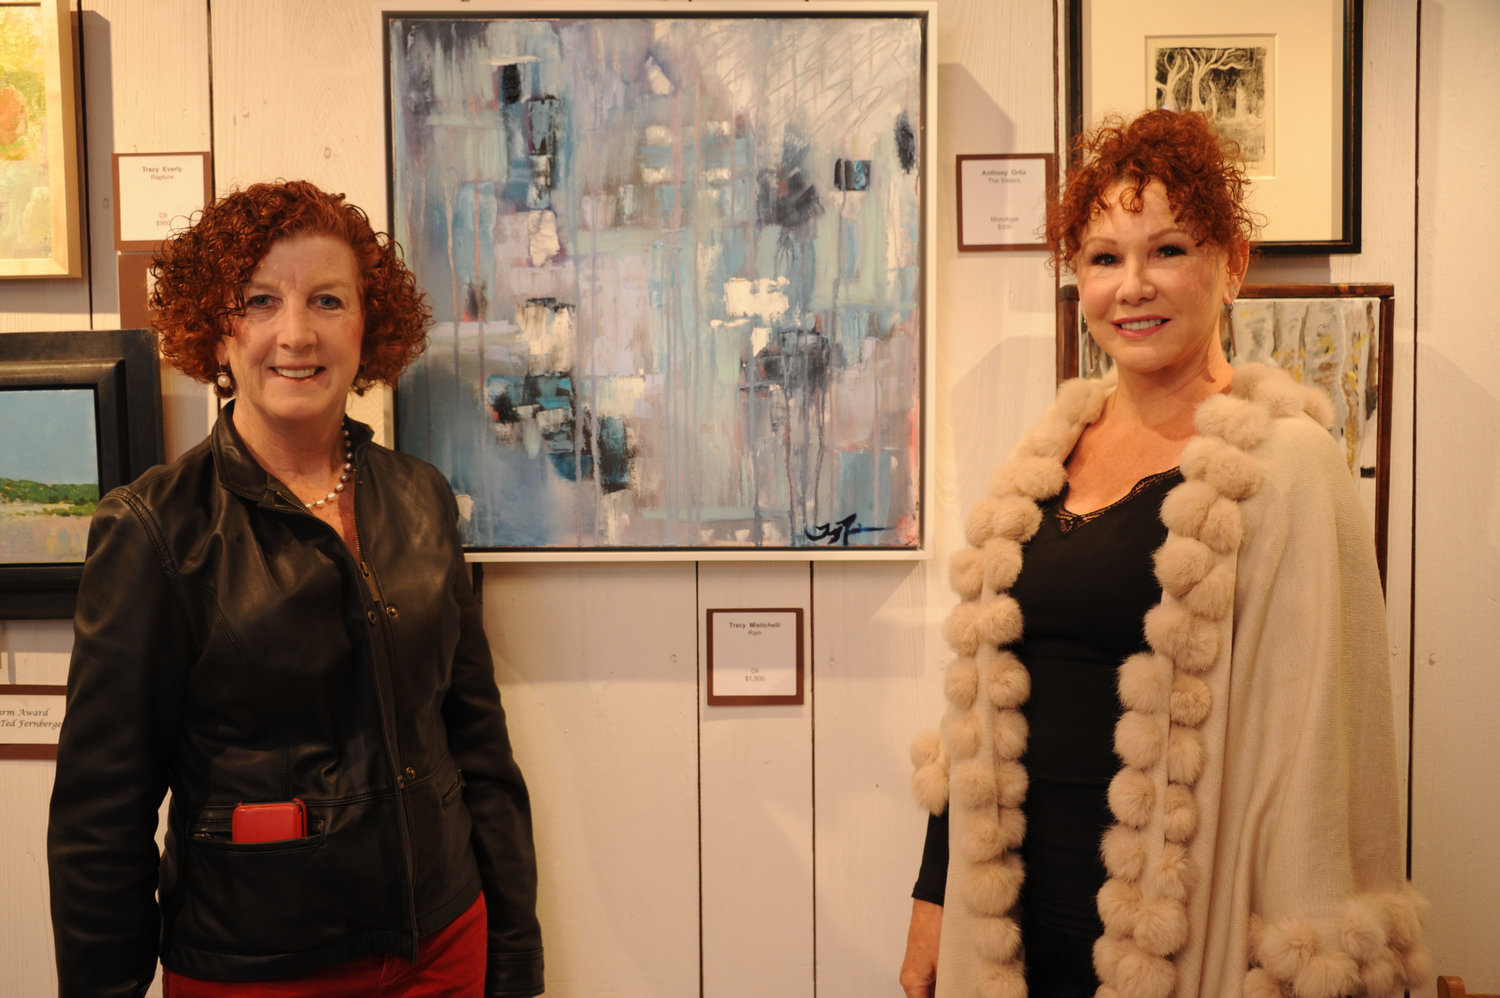 Maureen Feury and artist Tracy Mistichelli, whose painting “Rain” is pictured in the center.